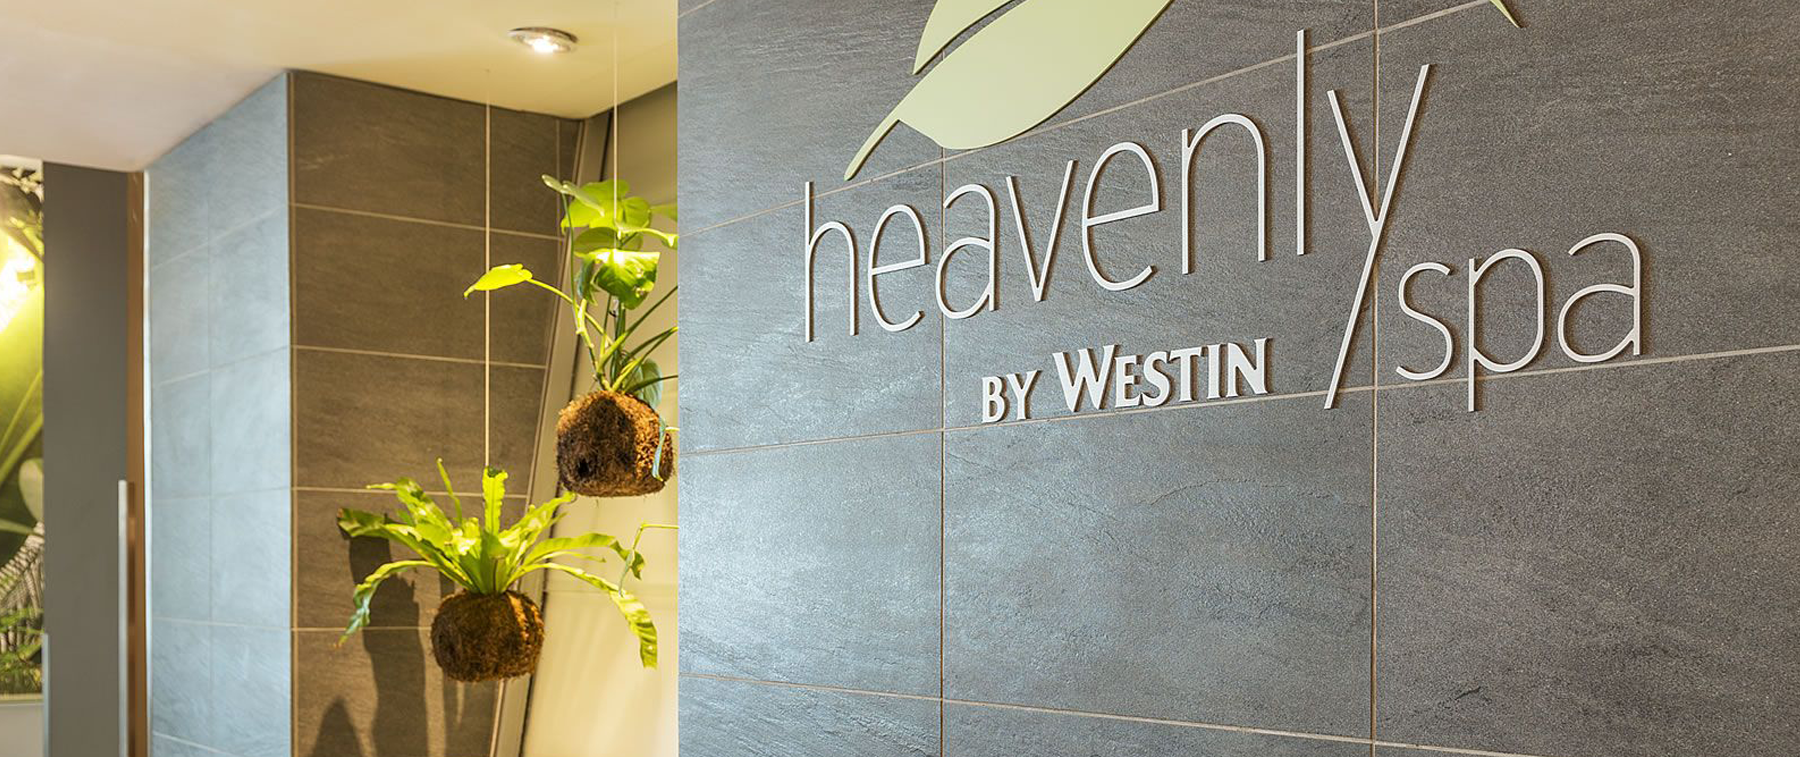 Heavenly Spa By Westin Cape Town South Africa Welcome